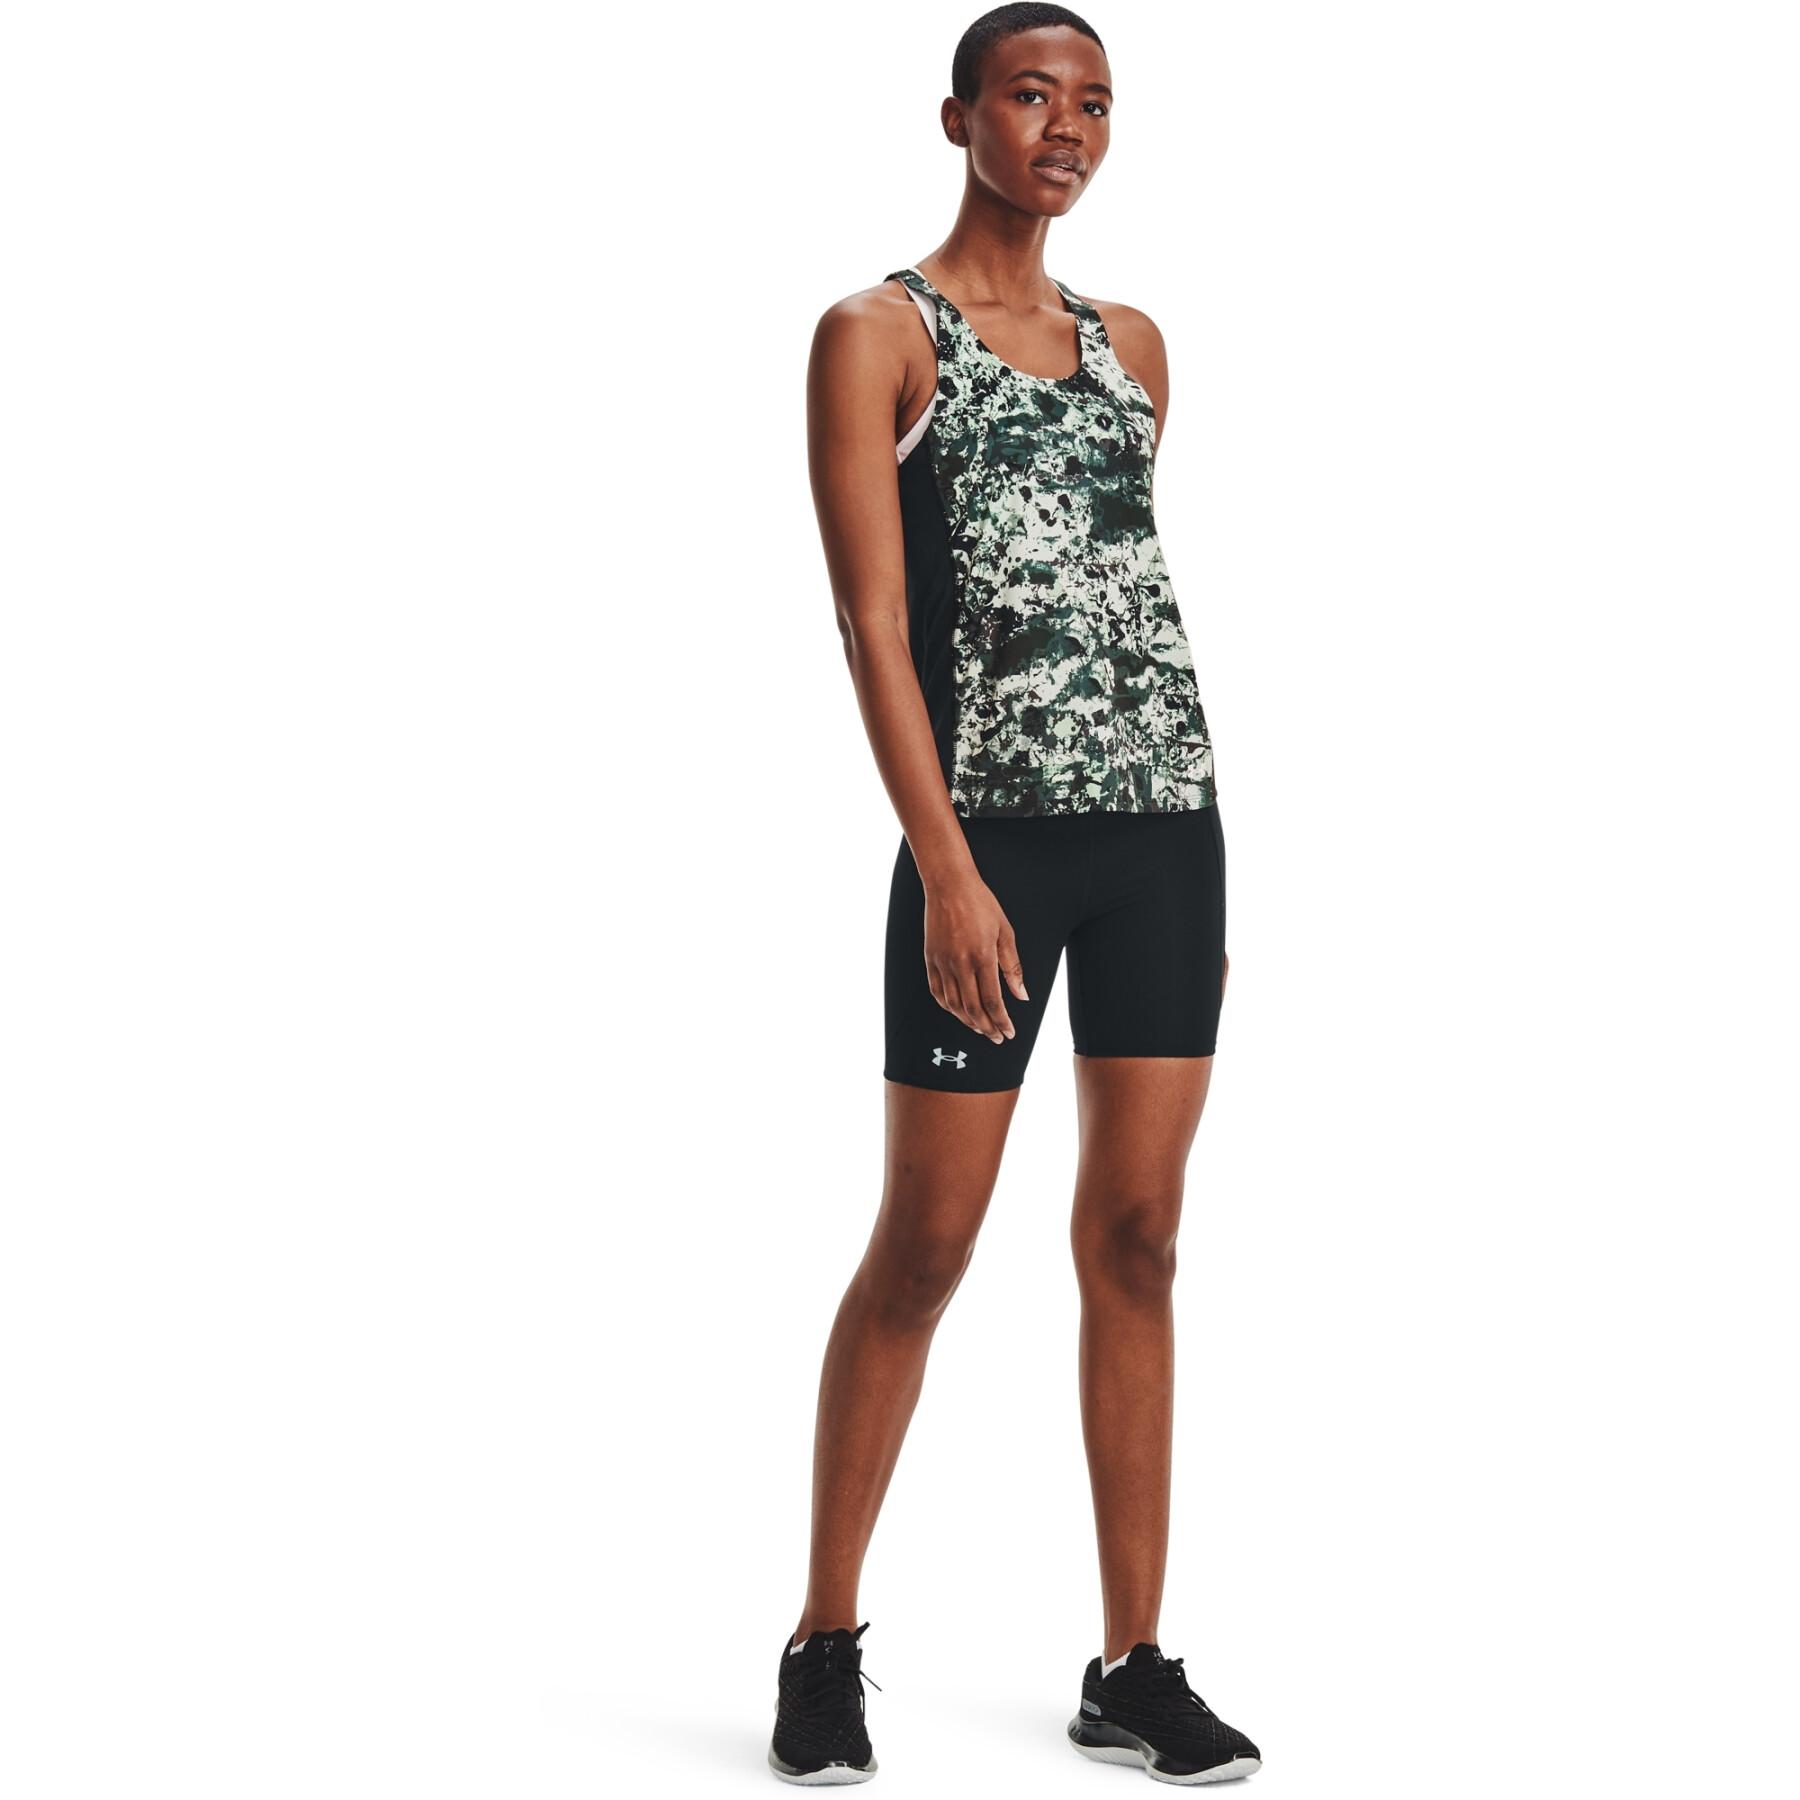 Short à poches femme Under Armour Fly Fast